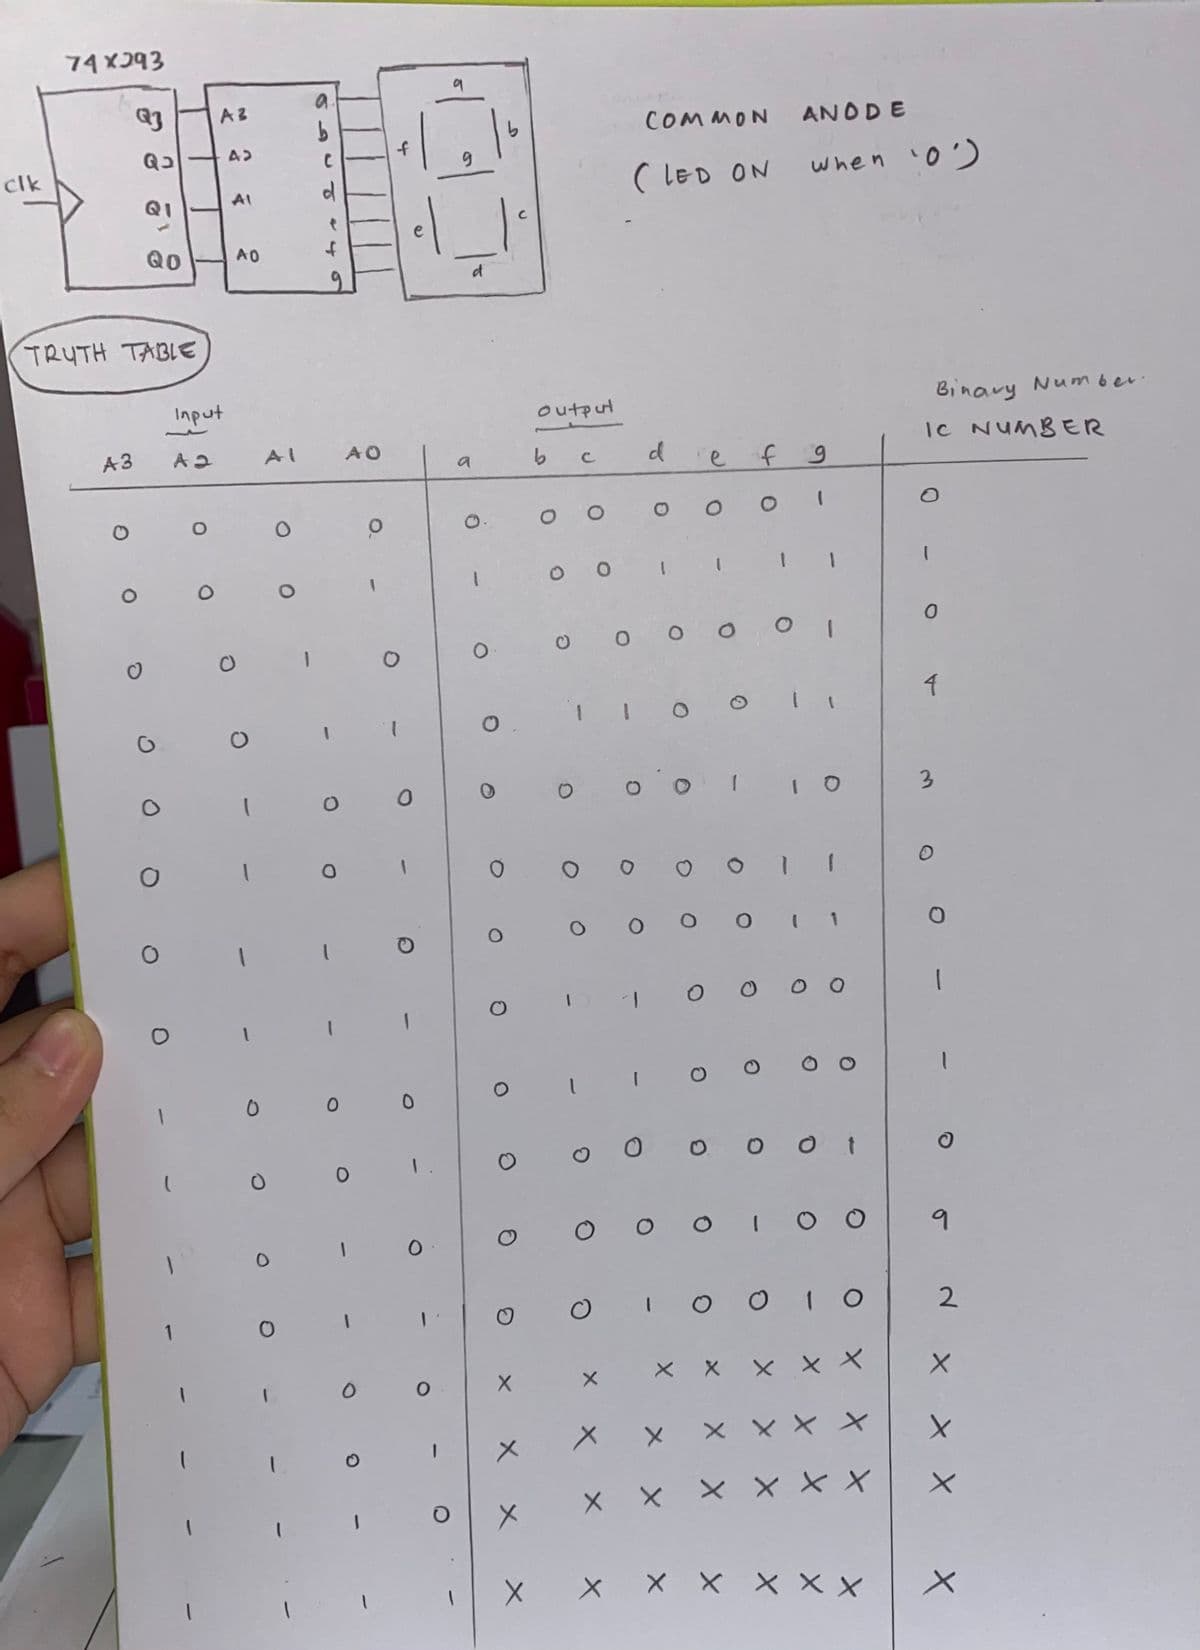 74 X393
COMMON
ANODE
of
clk
( LED ON
when 0')
AI
e
QO
AO
TRUTH TABLE
Input
output
Binavy Number.
A3
A 2
IC NUMBER
AI
AO
d
efg
a
3.
1
9.
O I O 010
X X X x x xX
2.
X X
メ
